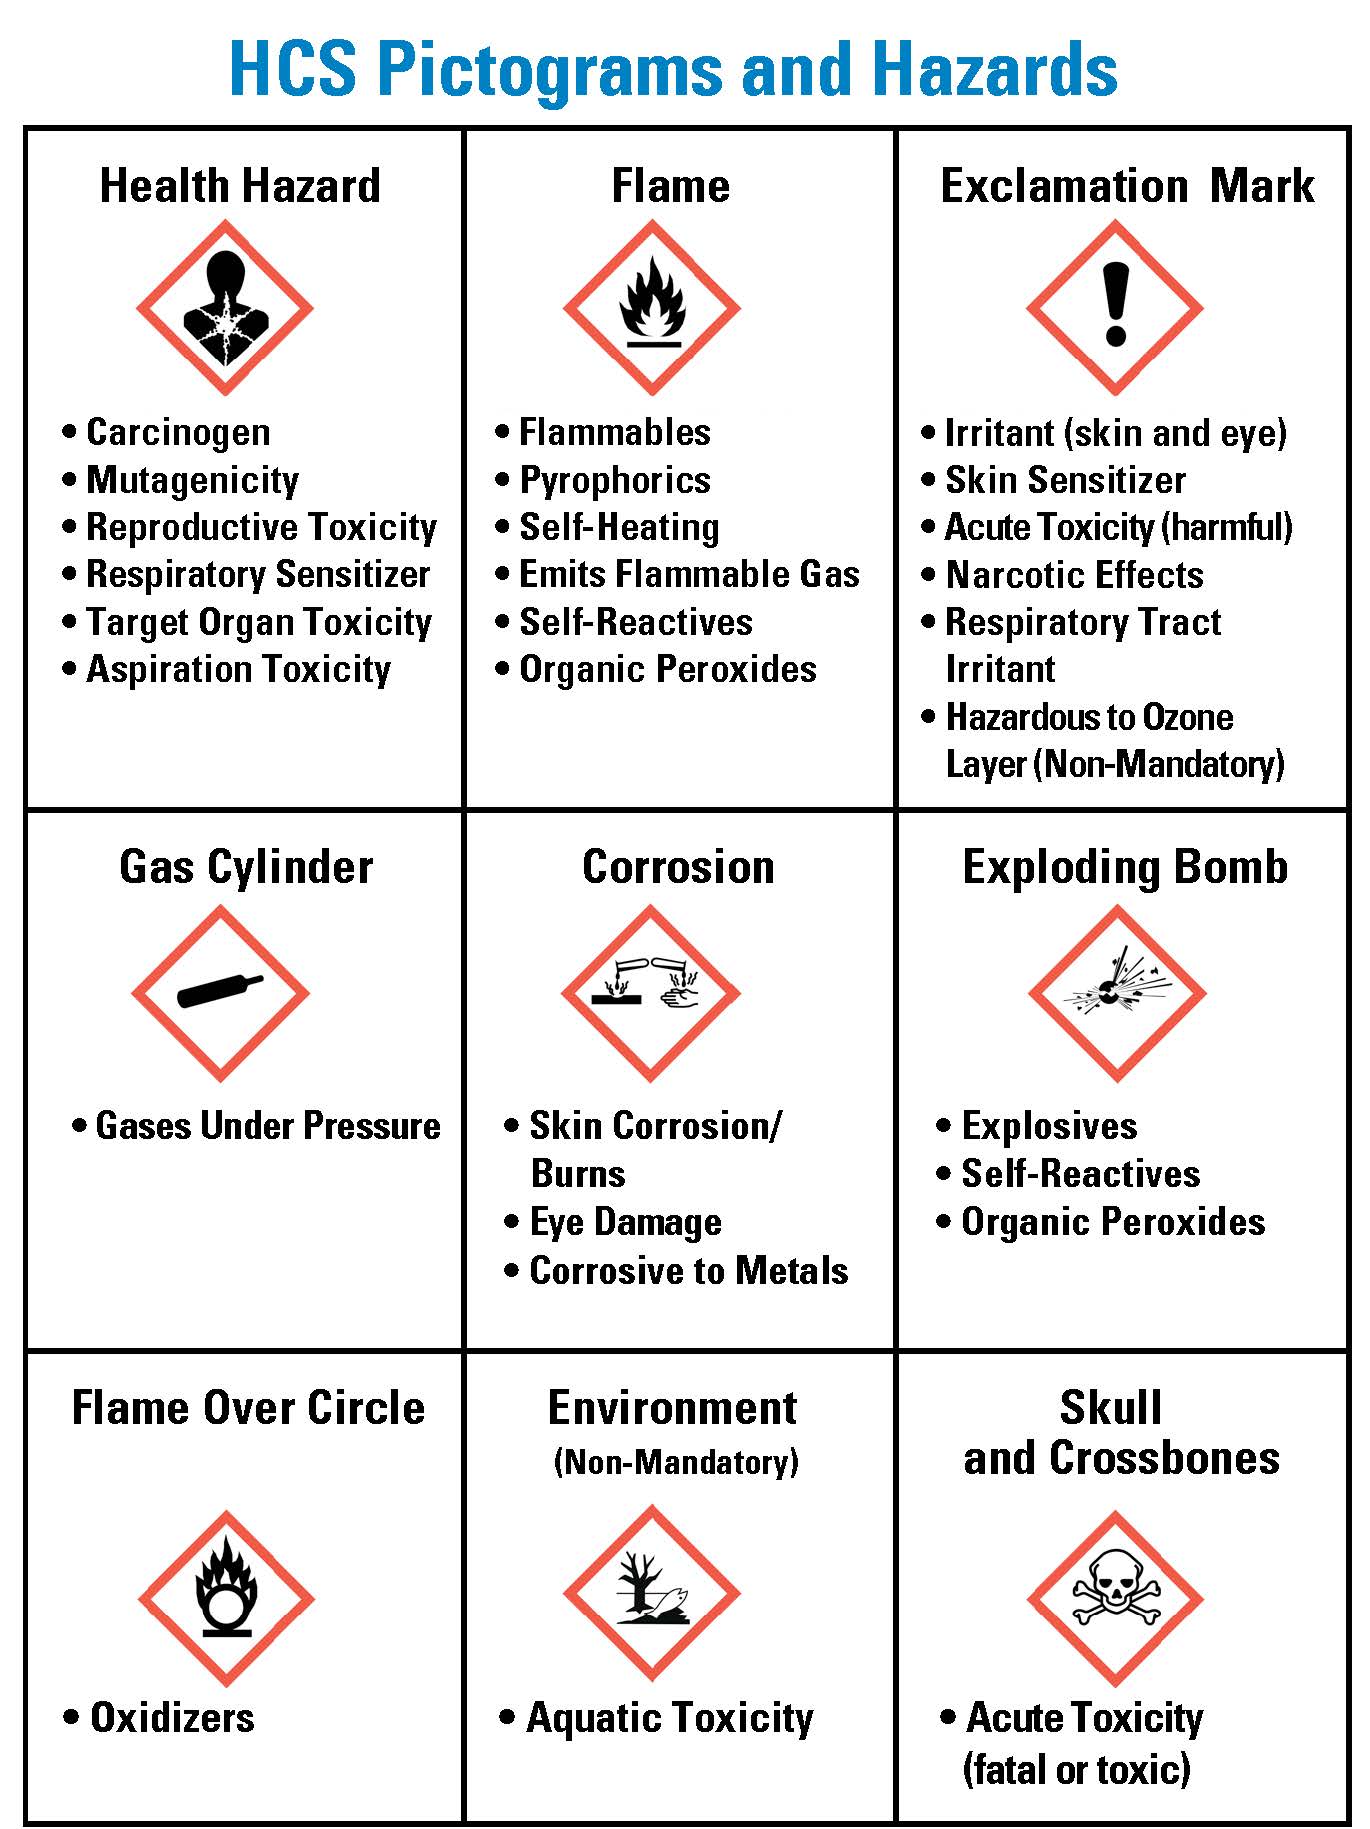 A Visual Guide to HazCom Pictograms, Chemical Labels, and SDS - ZING ...